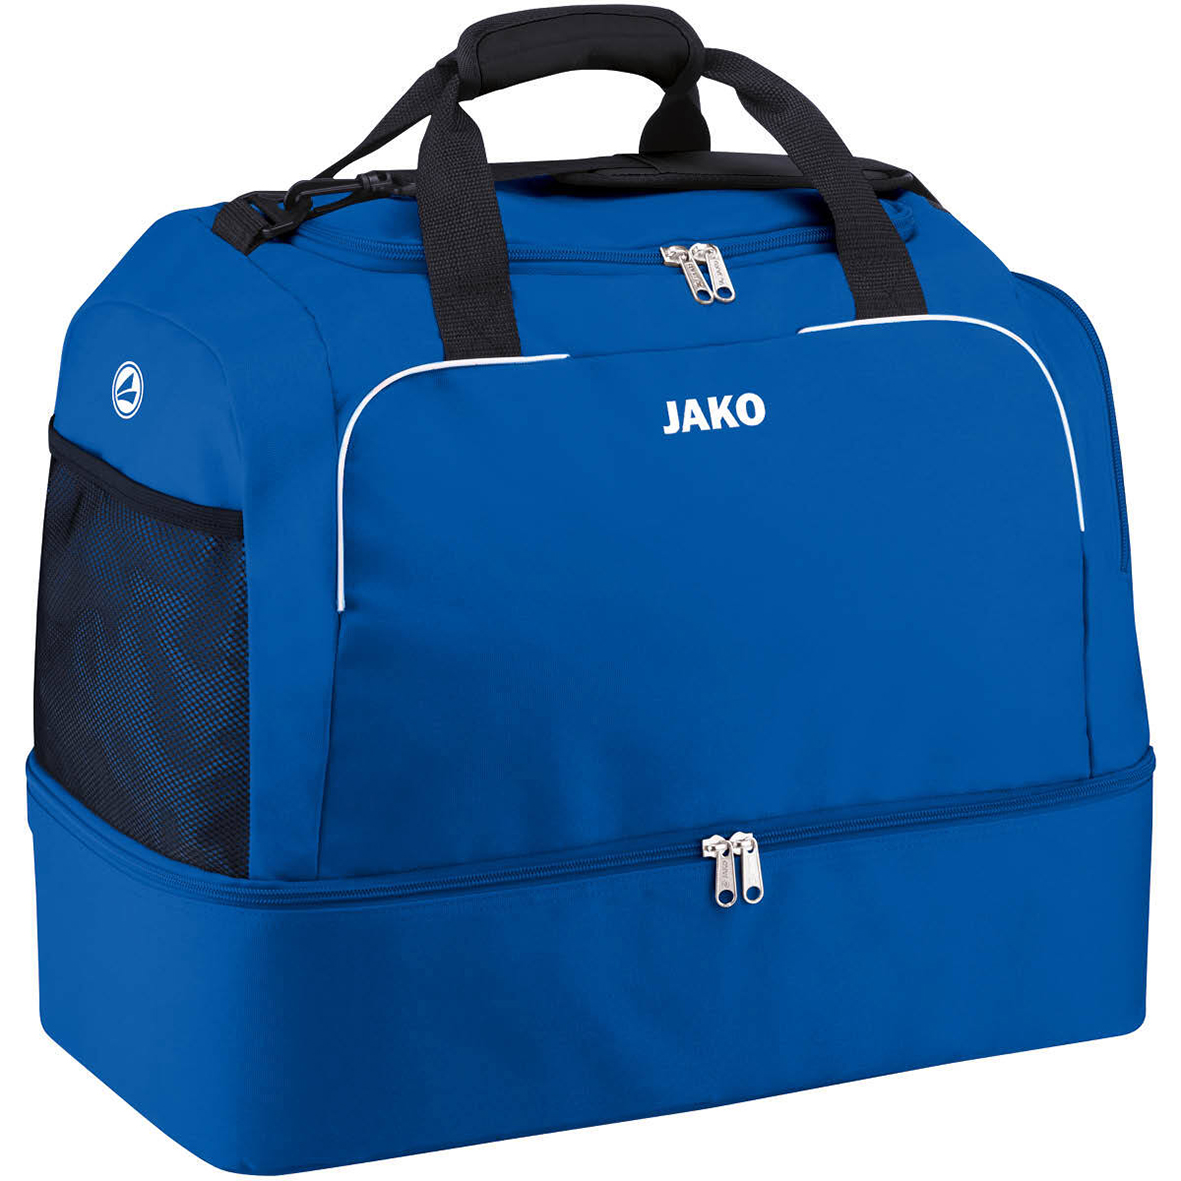 SPORTS BAG JAKO CLASSICO WITH BASE COMPARTMENT, ROYAL.